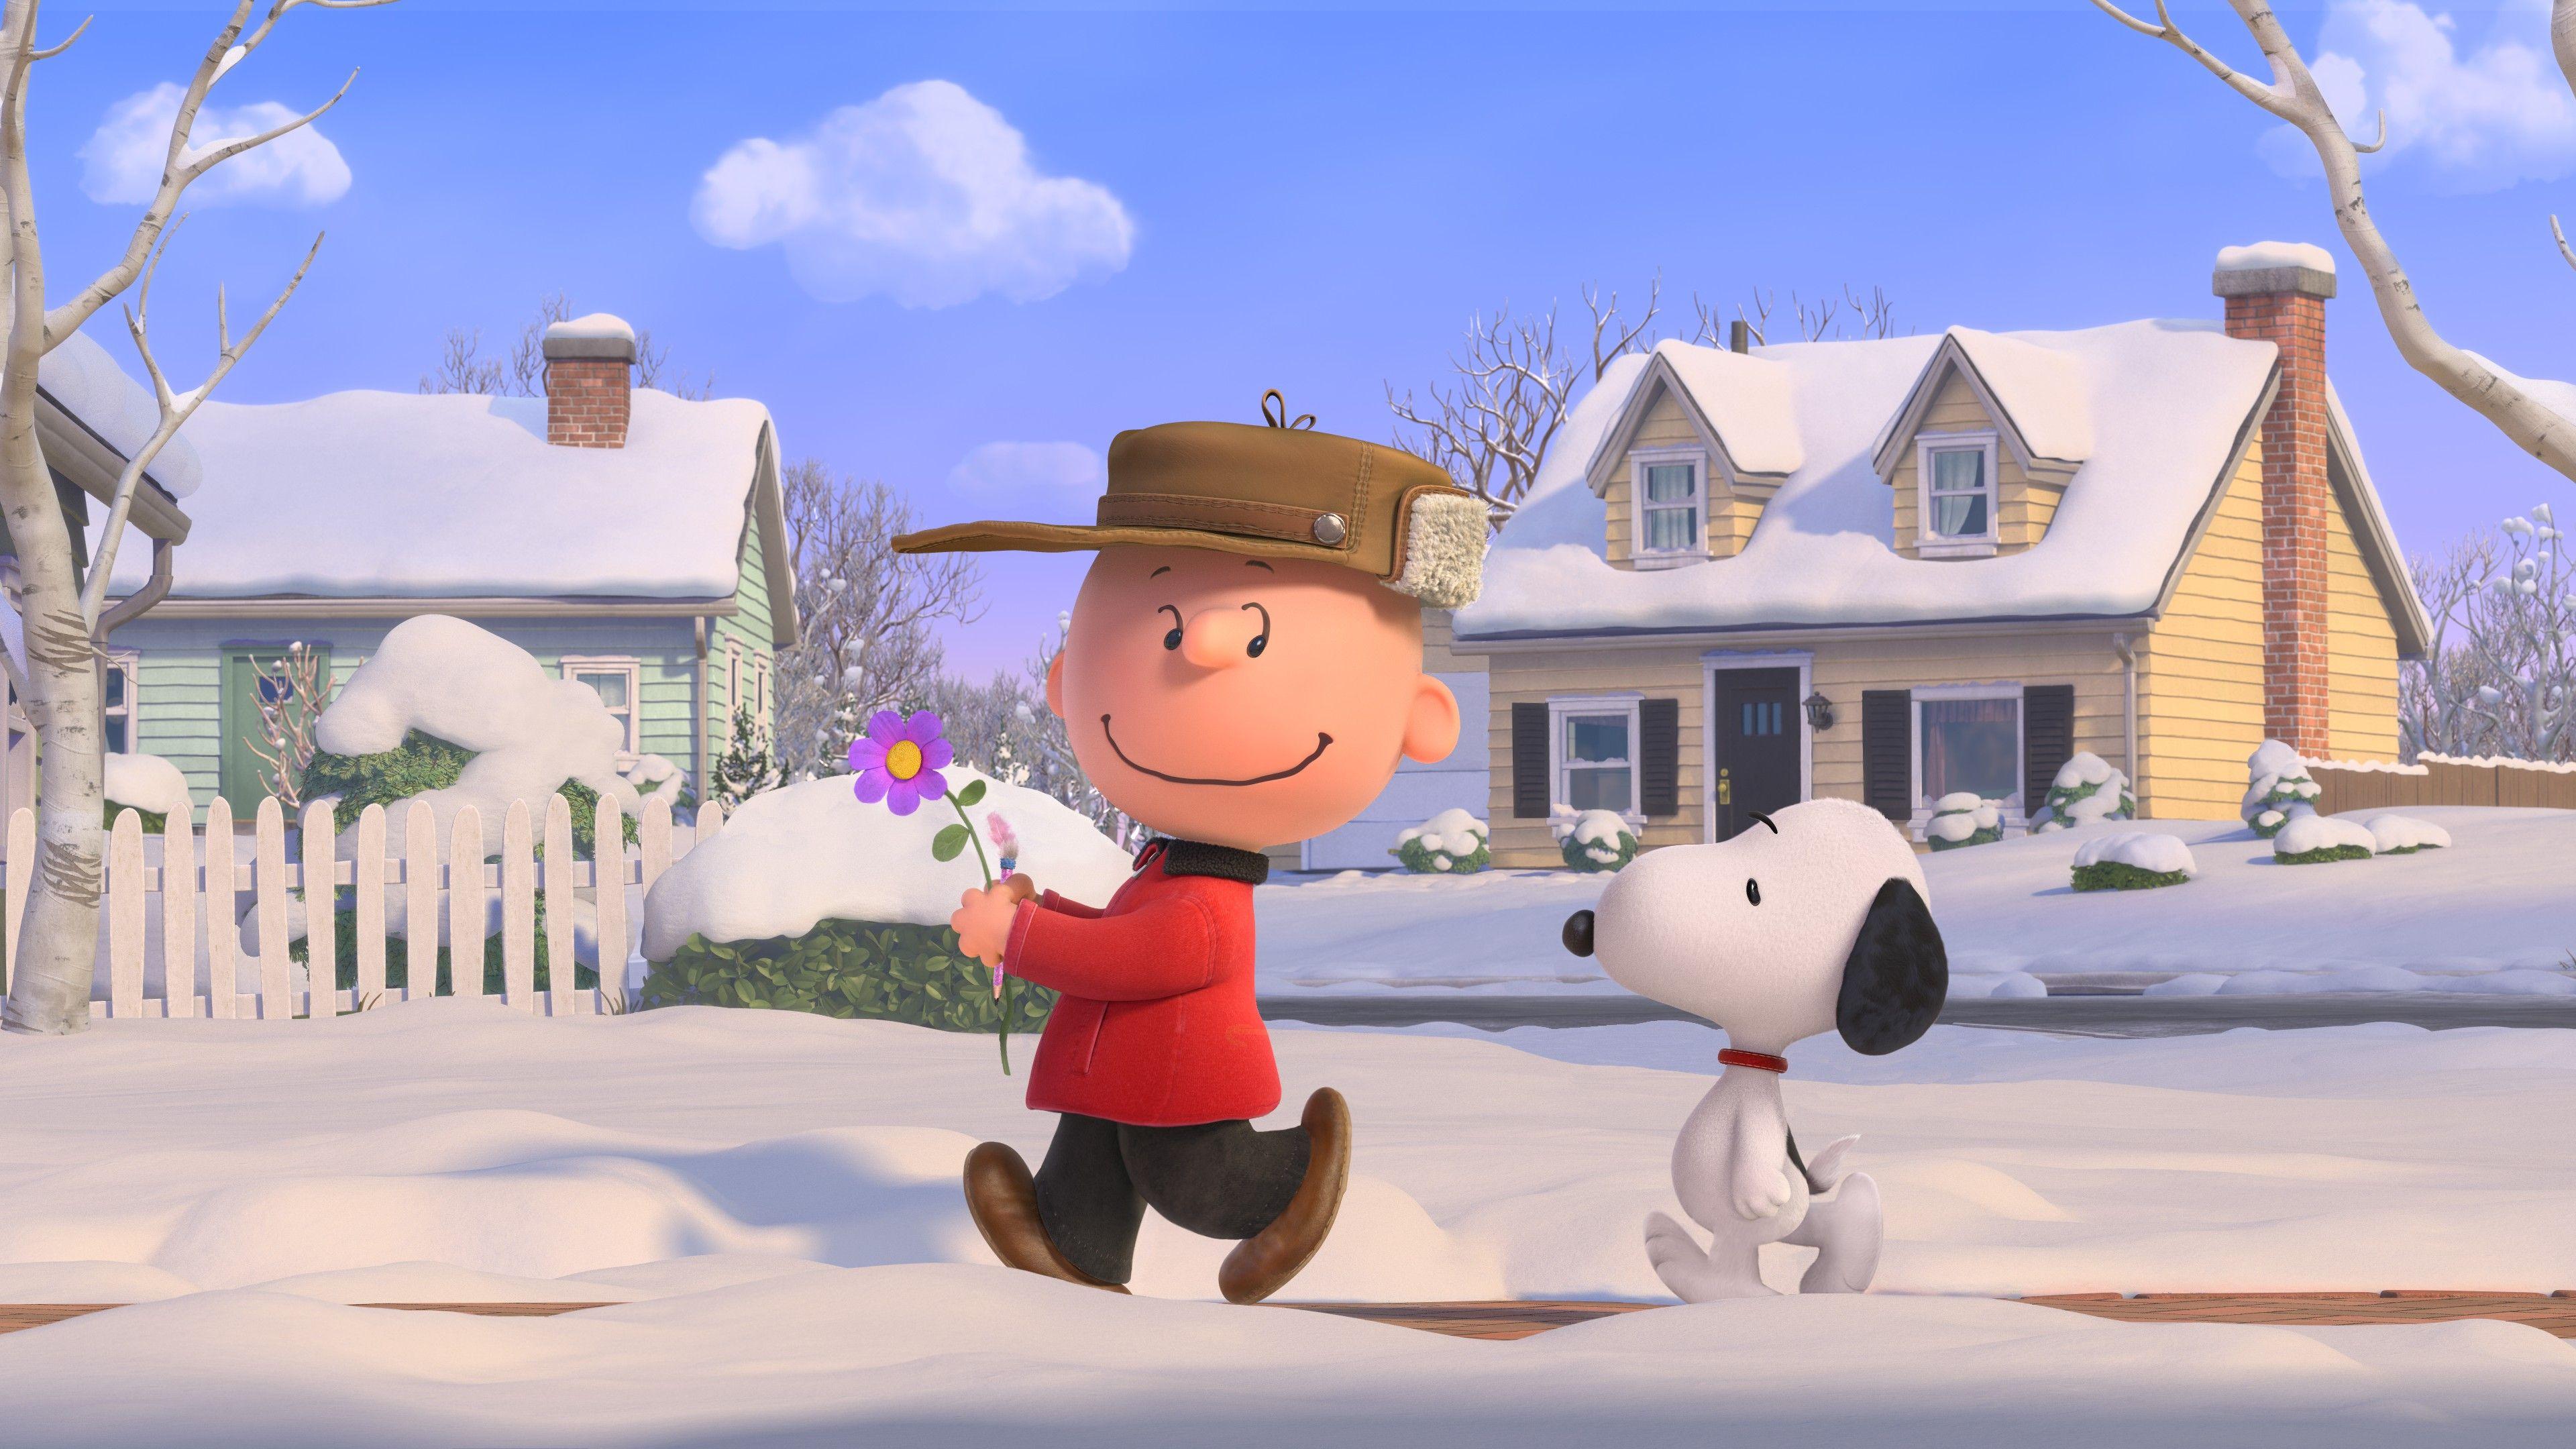 Snoopy Winter Wallpapers Top Free Snoopy Winter Backgrounds Images, Photos, Reviews